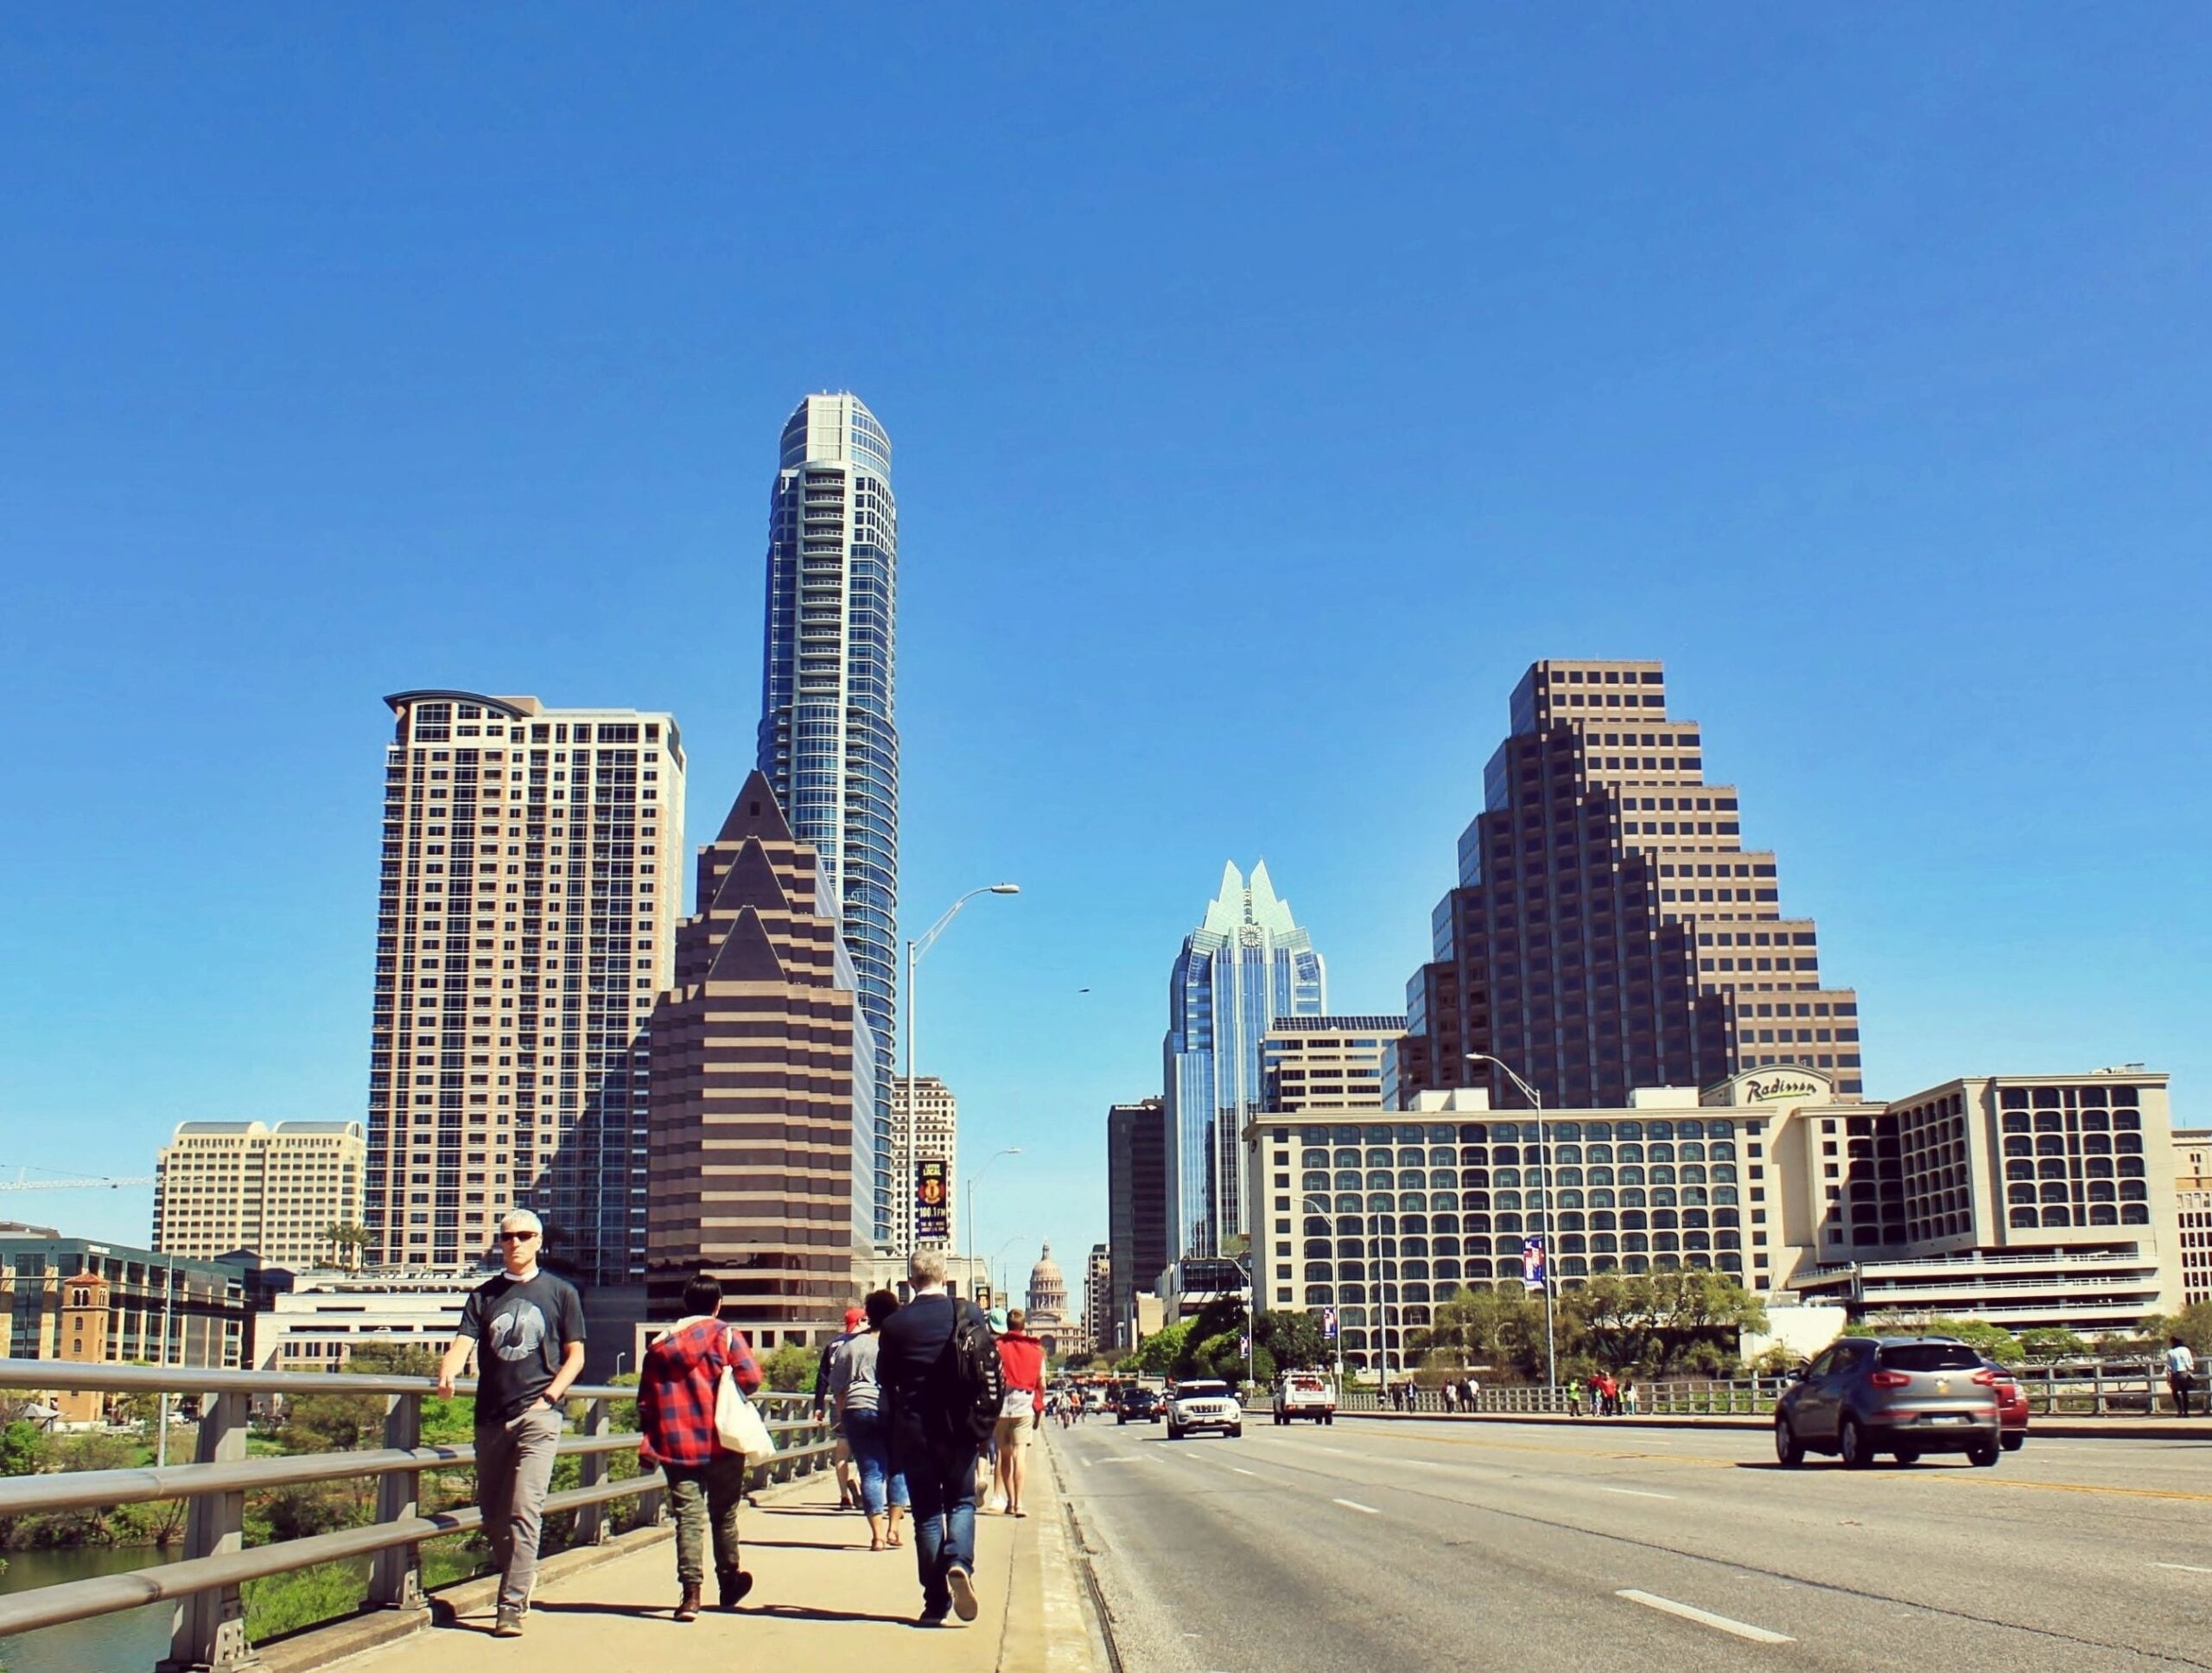 Austin skyline against a blue sky with three adults walking across a bridge and cars passing on the roadway